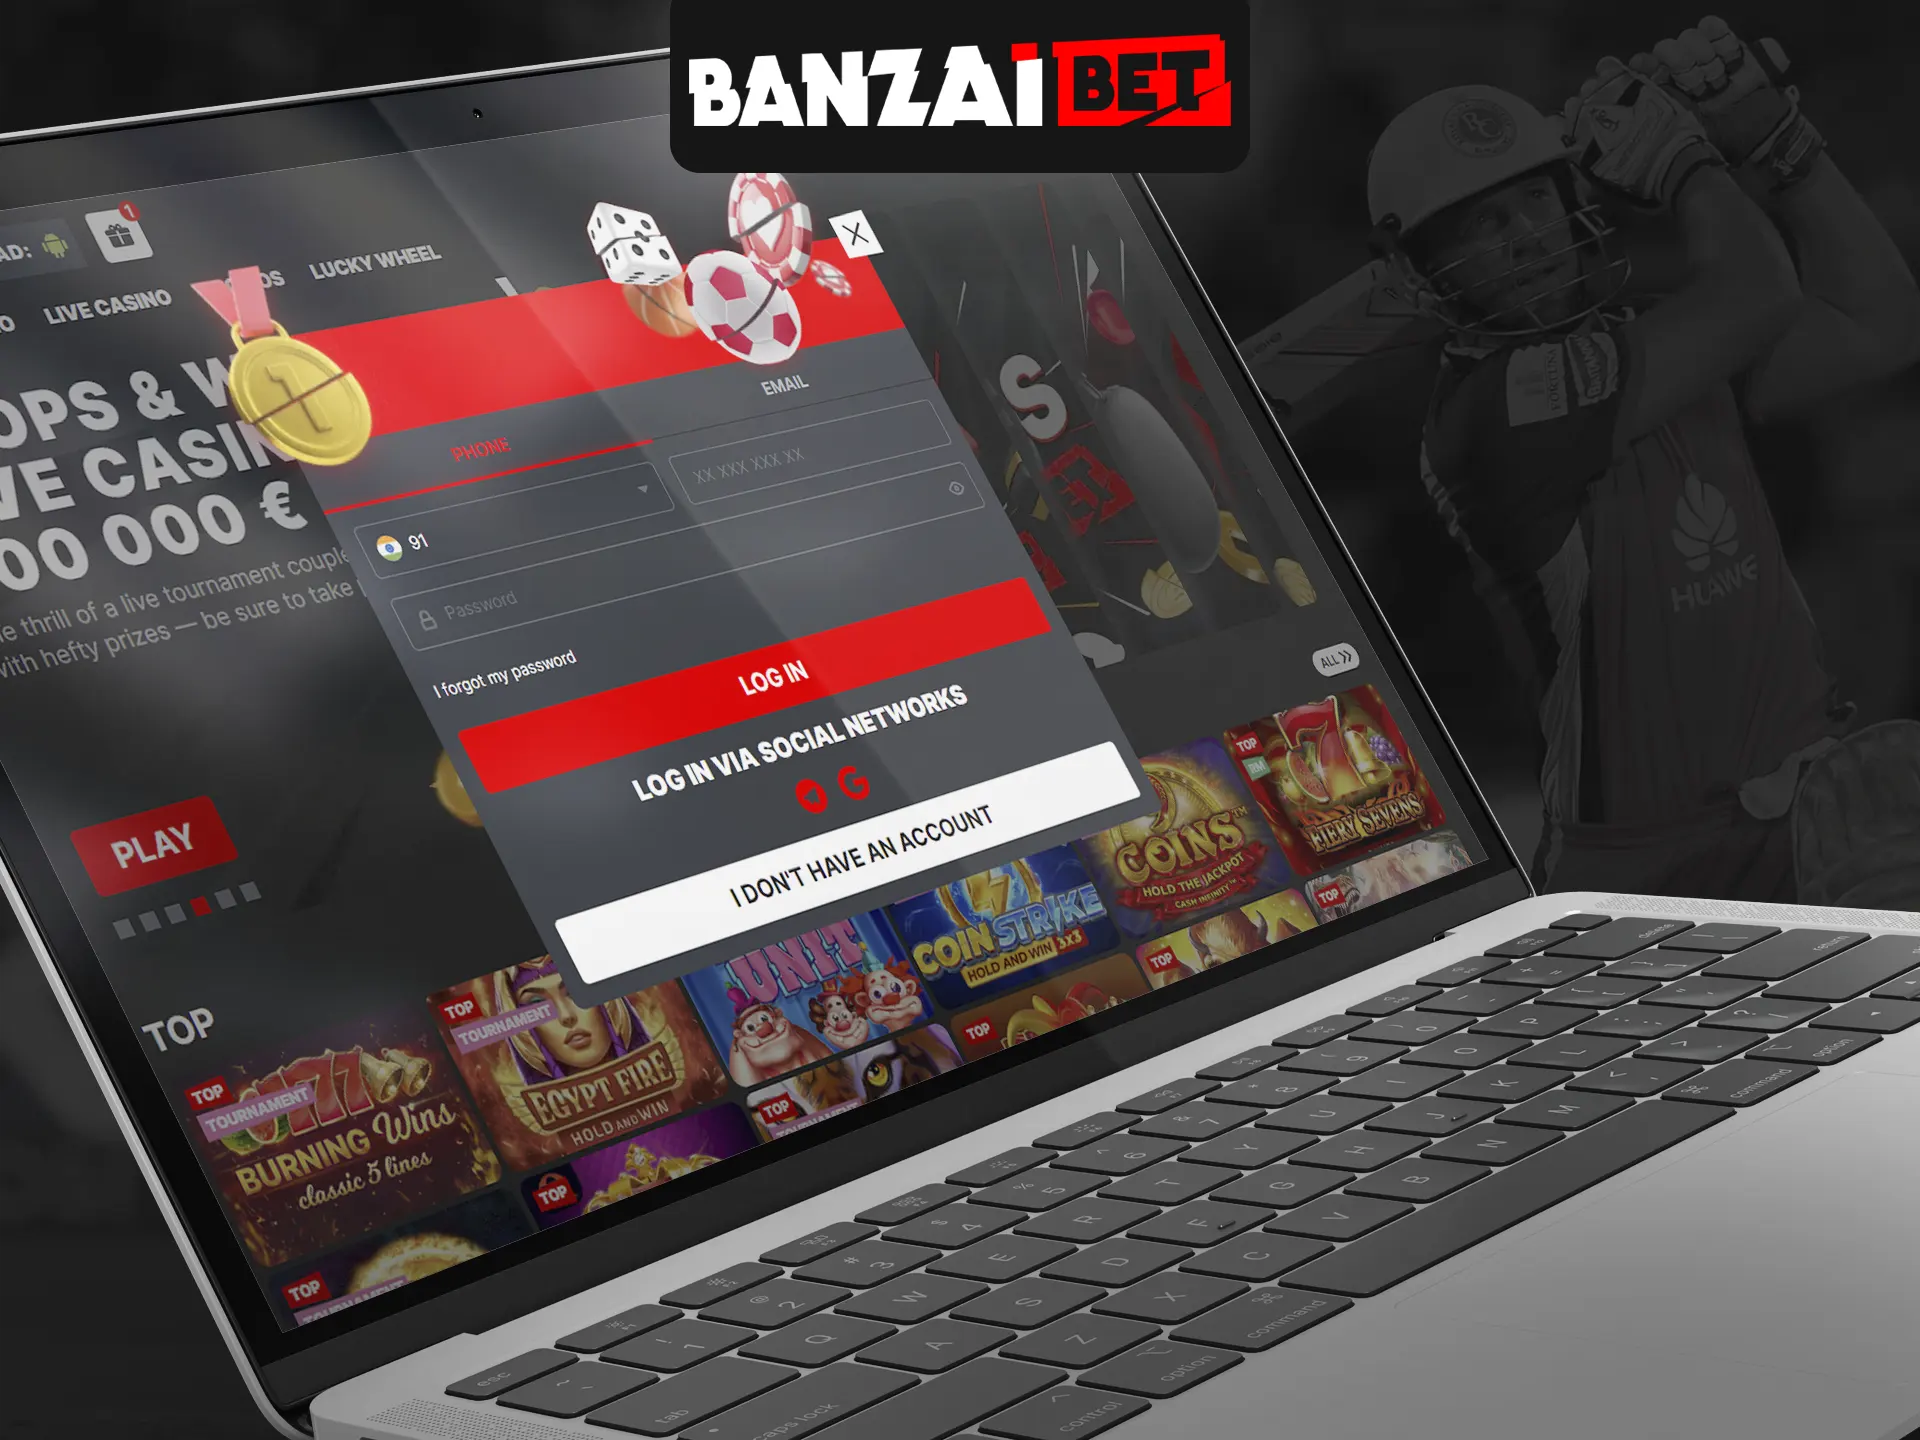 Log in to your Banzai Bet account.